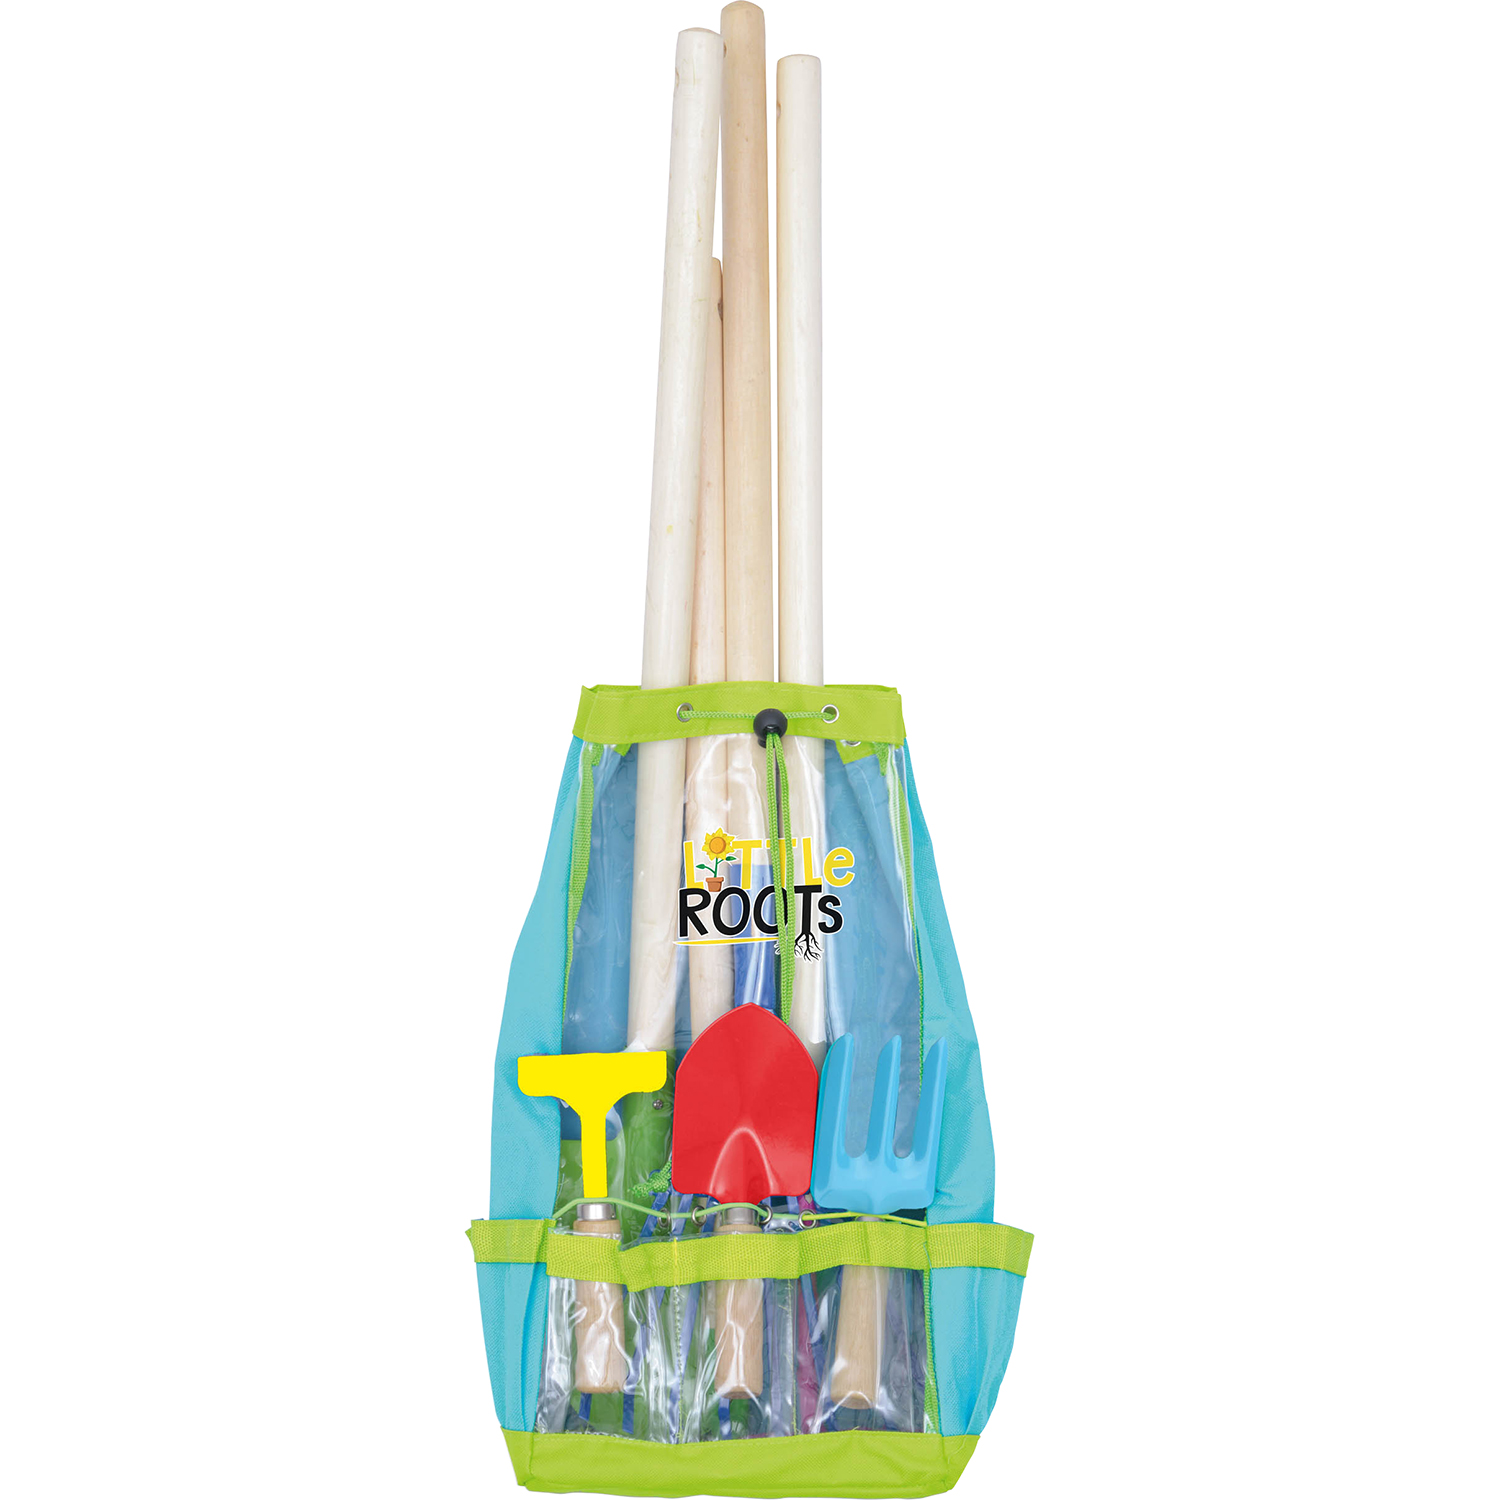 Little Roots garden tool set with backpack